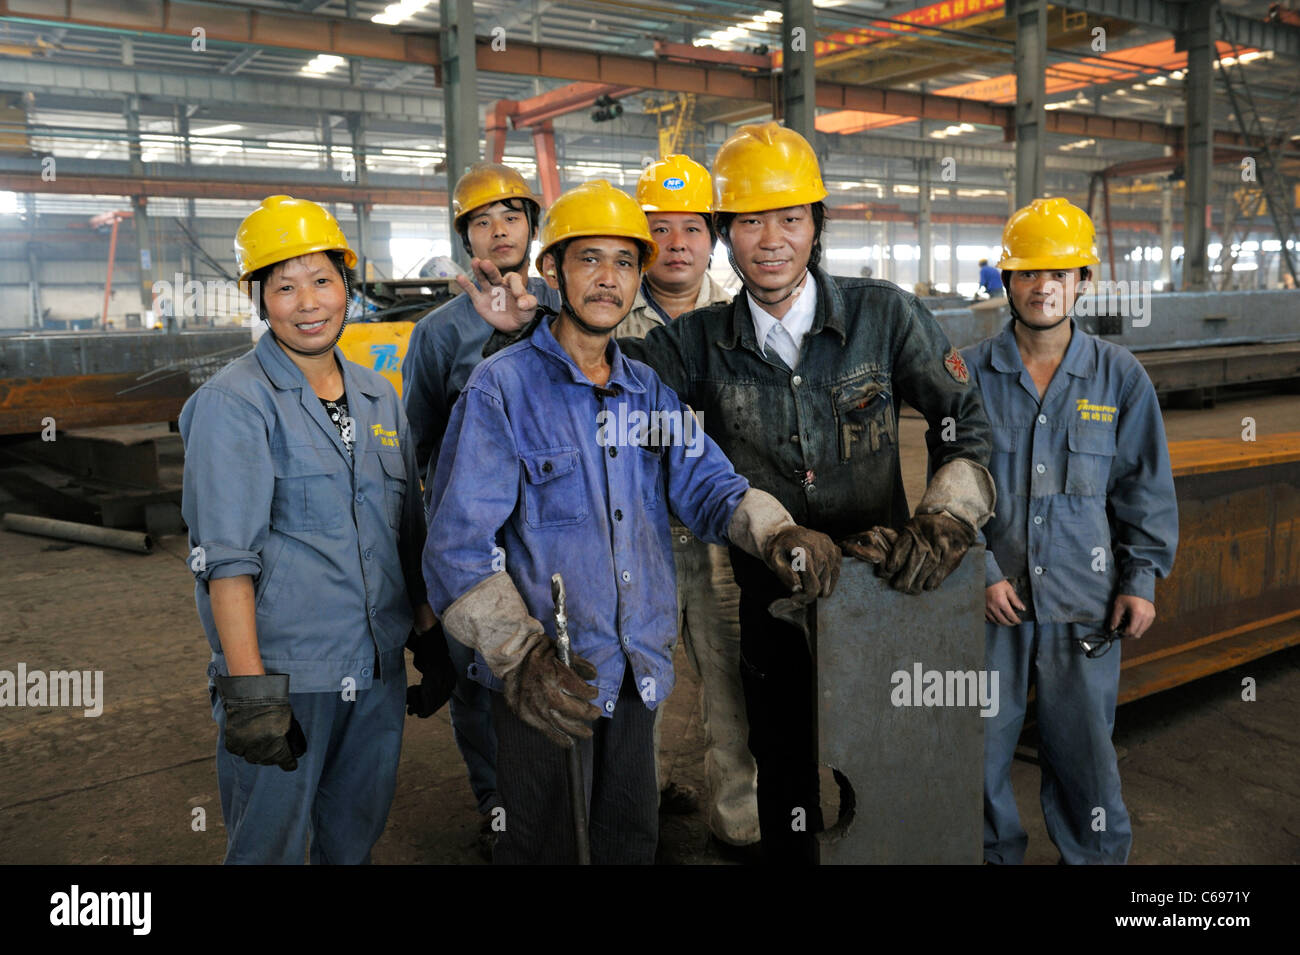 Hangzhou, Zhejiang Province, China. Steelworkers in fabrication shed of the giant Triumpher steel construction works Stock Photo